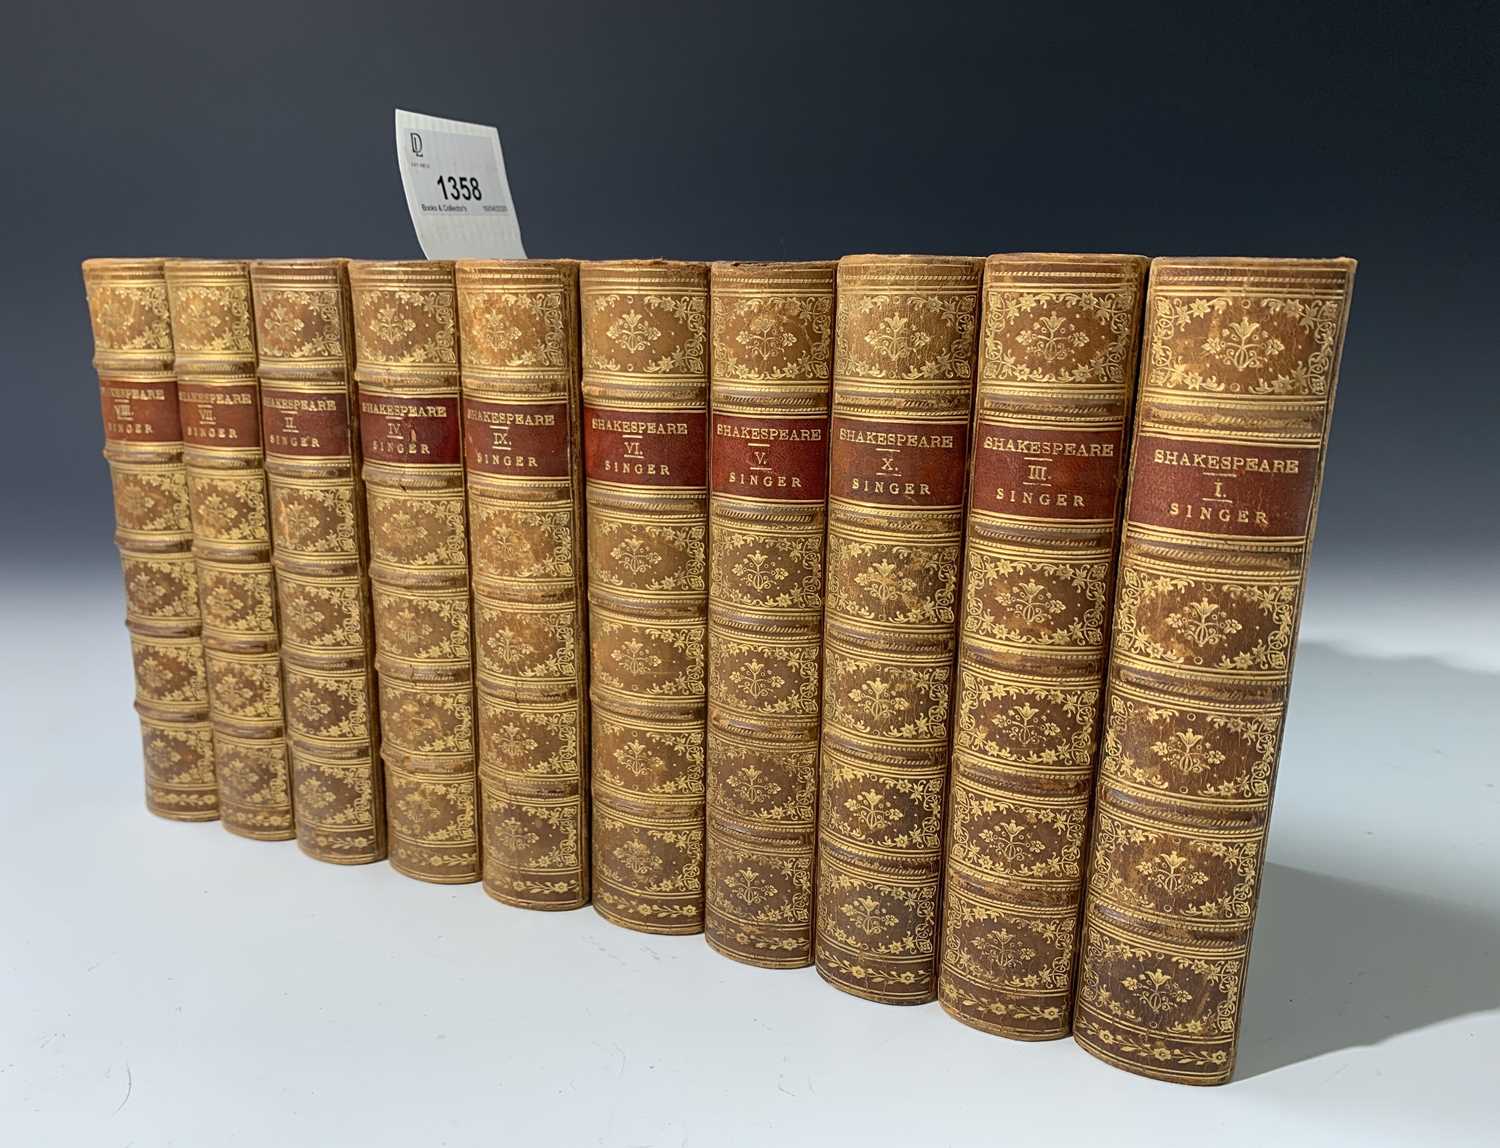 WILLIAM SHAKESPEARE. "The Dramatic Works of William Shakespeare.10 Vols complete, ed S.W. Singer, - Image 5 of 5